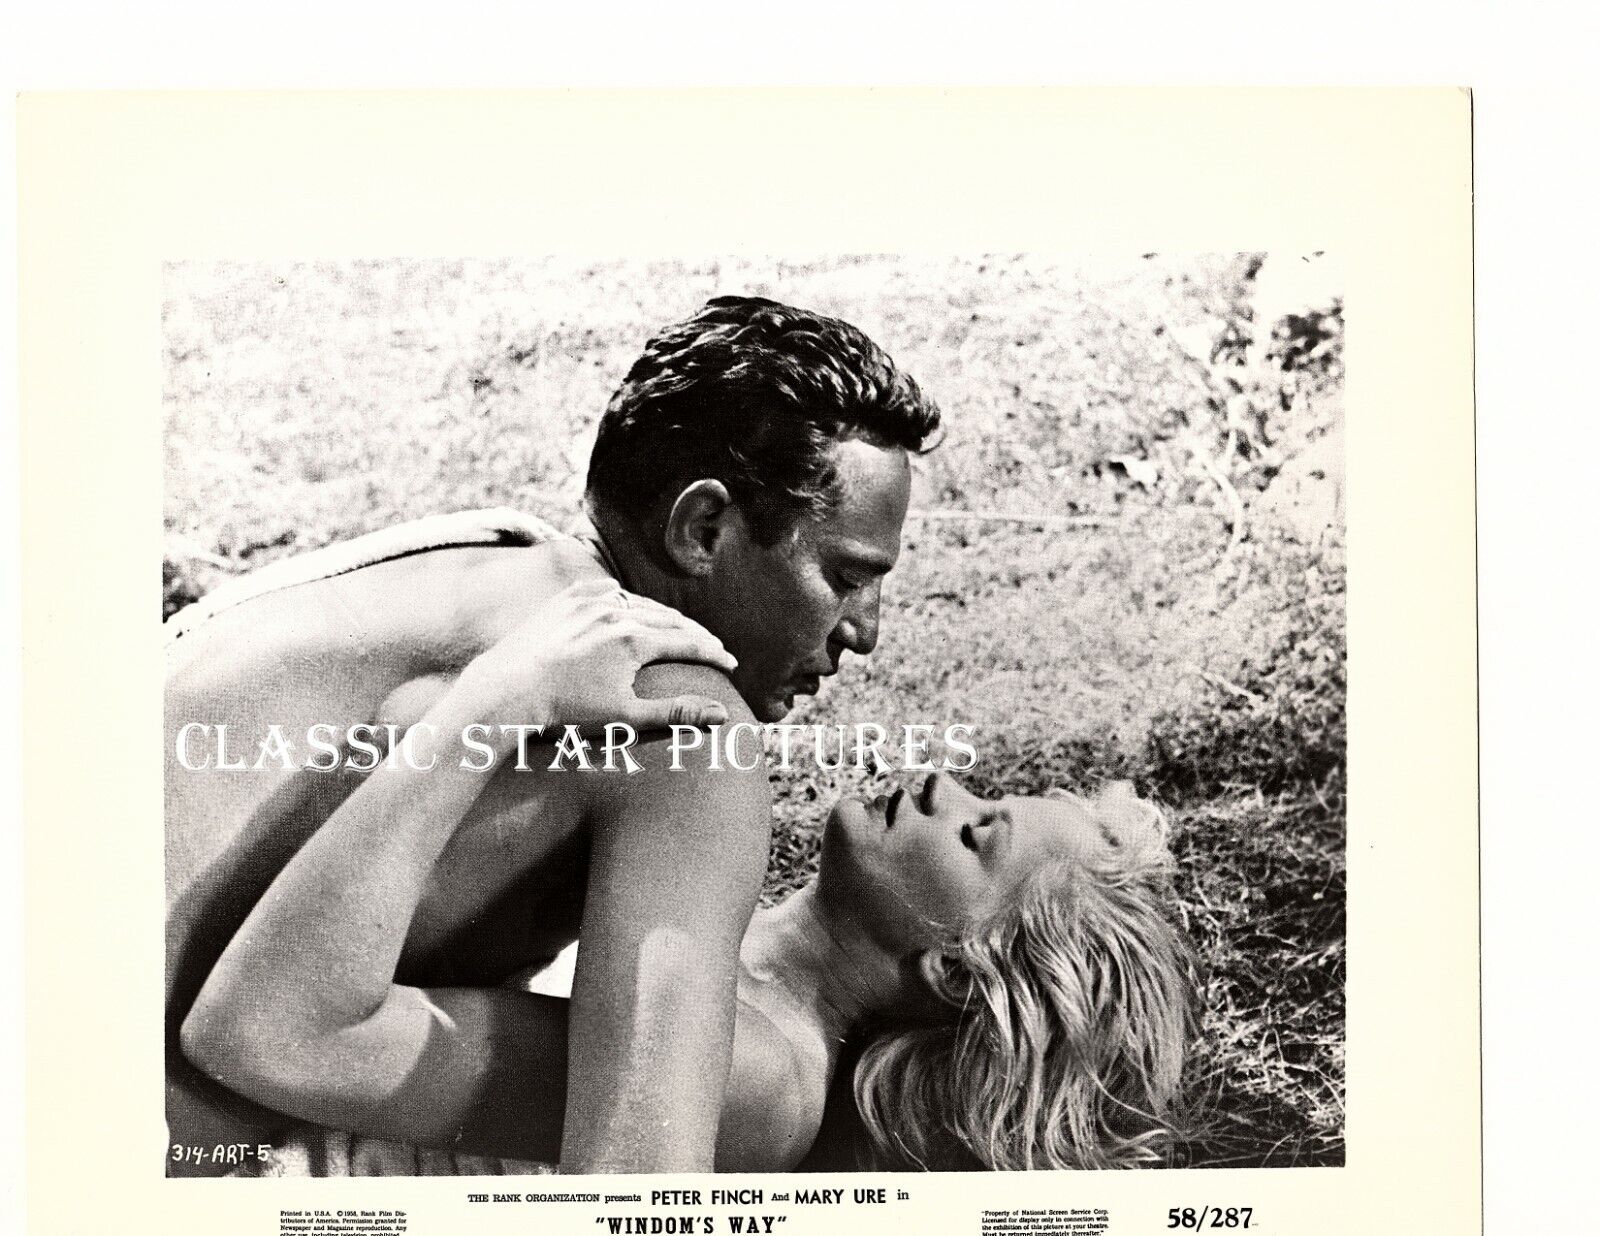 Q499  Peter Finch Mary Ure Windom\'s Way 1957  8 x 10 vintage photograph